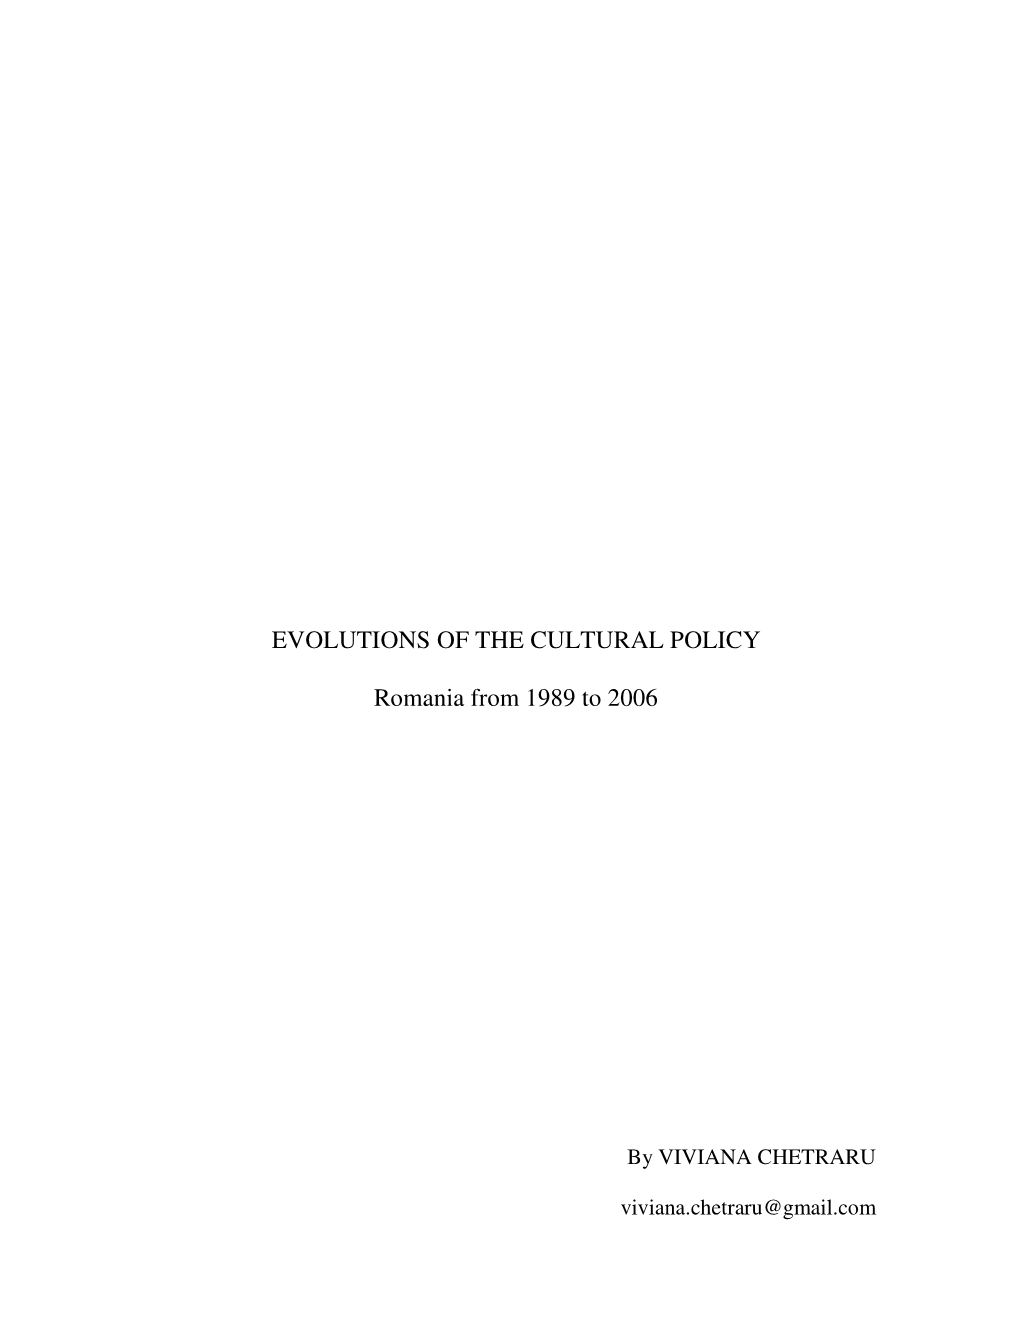 EVOLUTIONS of the CULTURAL POLICY Romania from 1989 to 2006